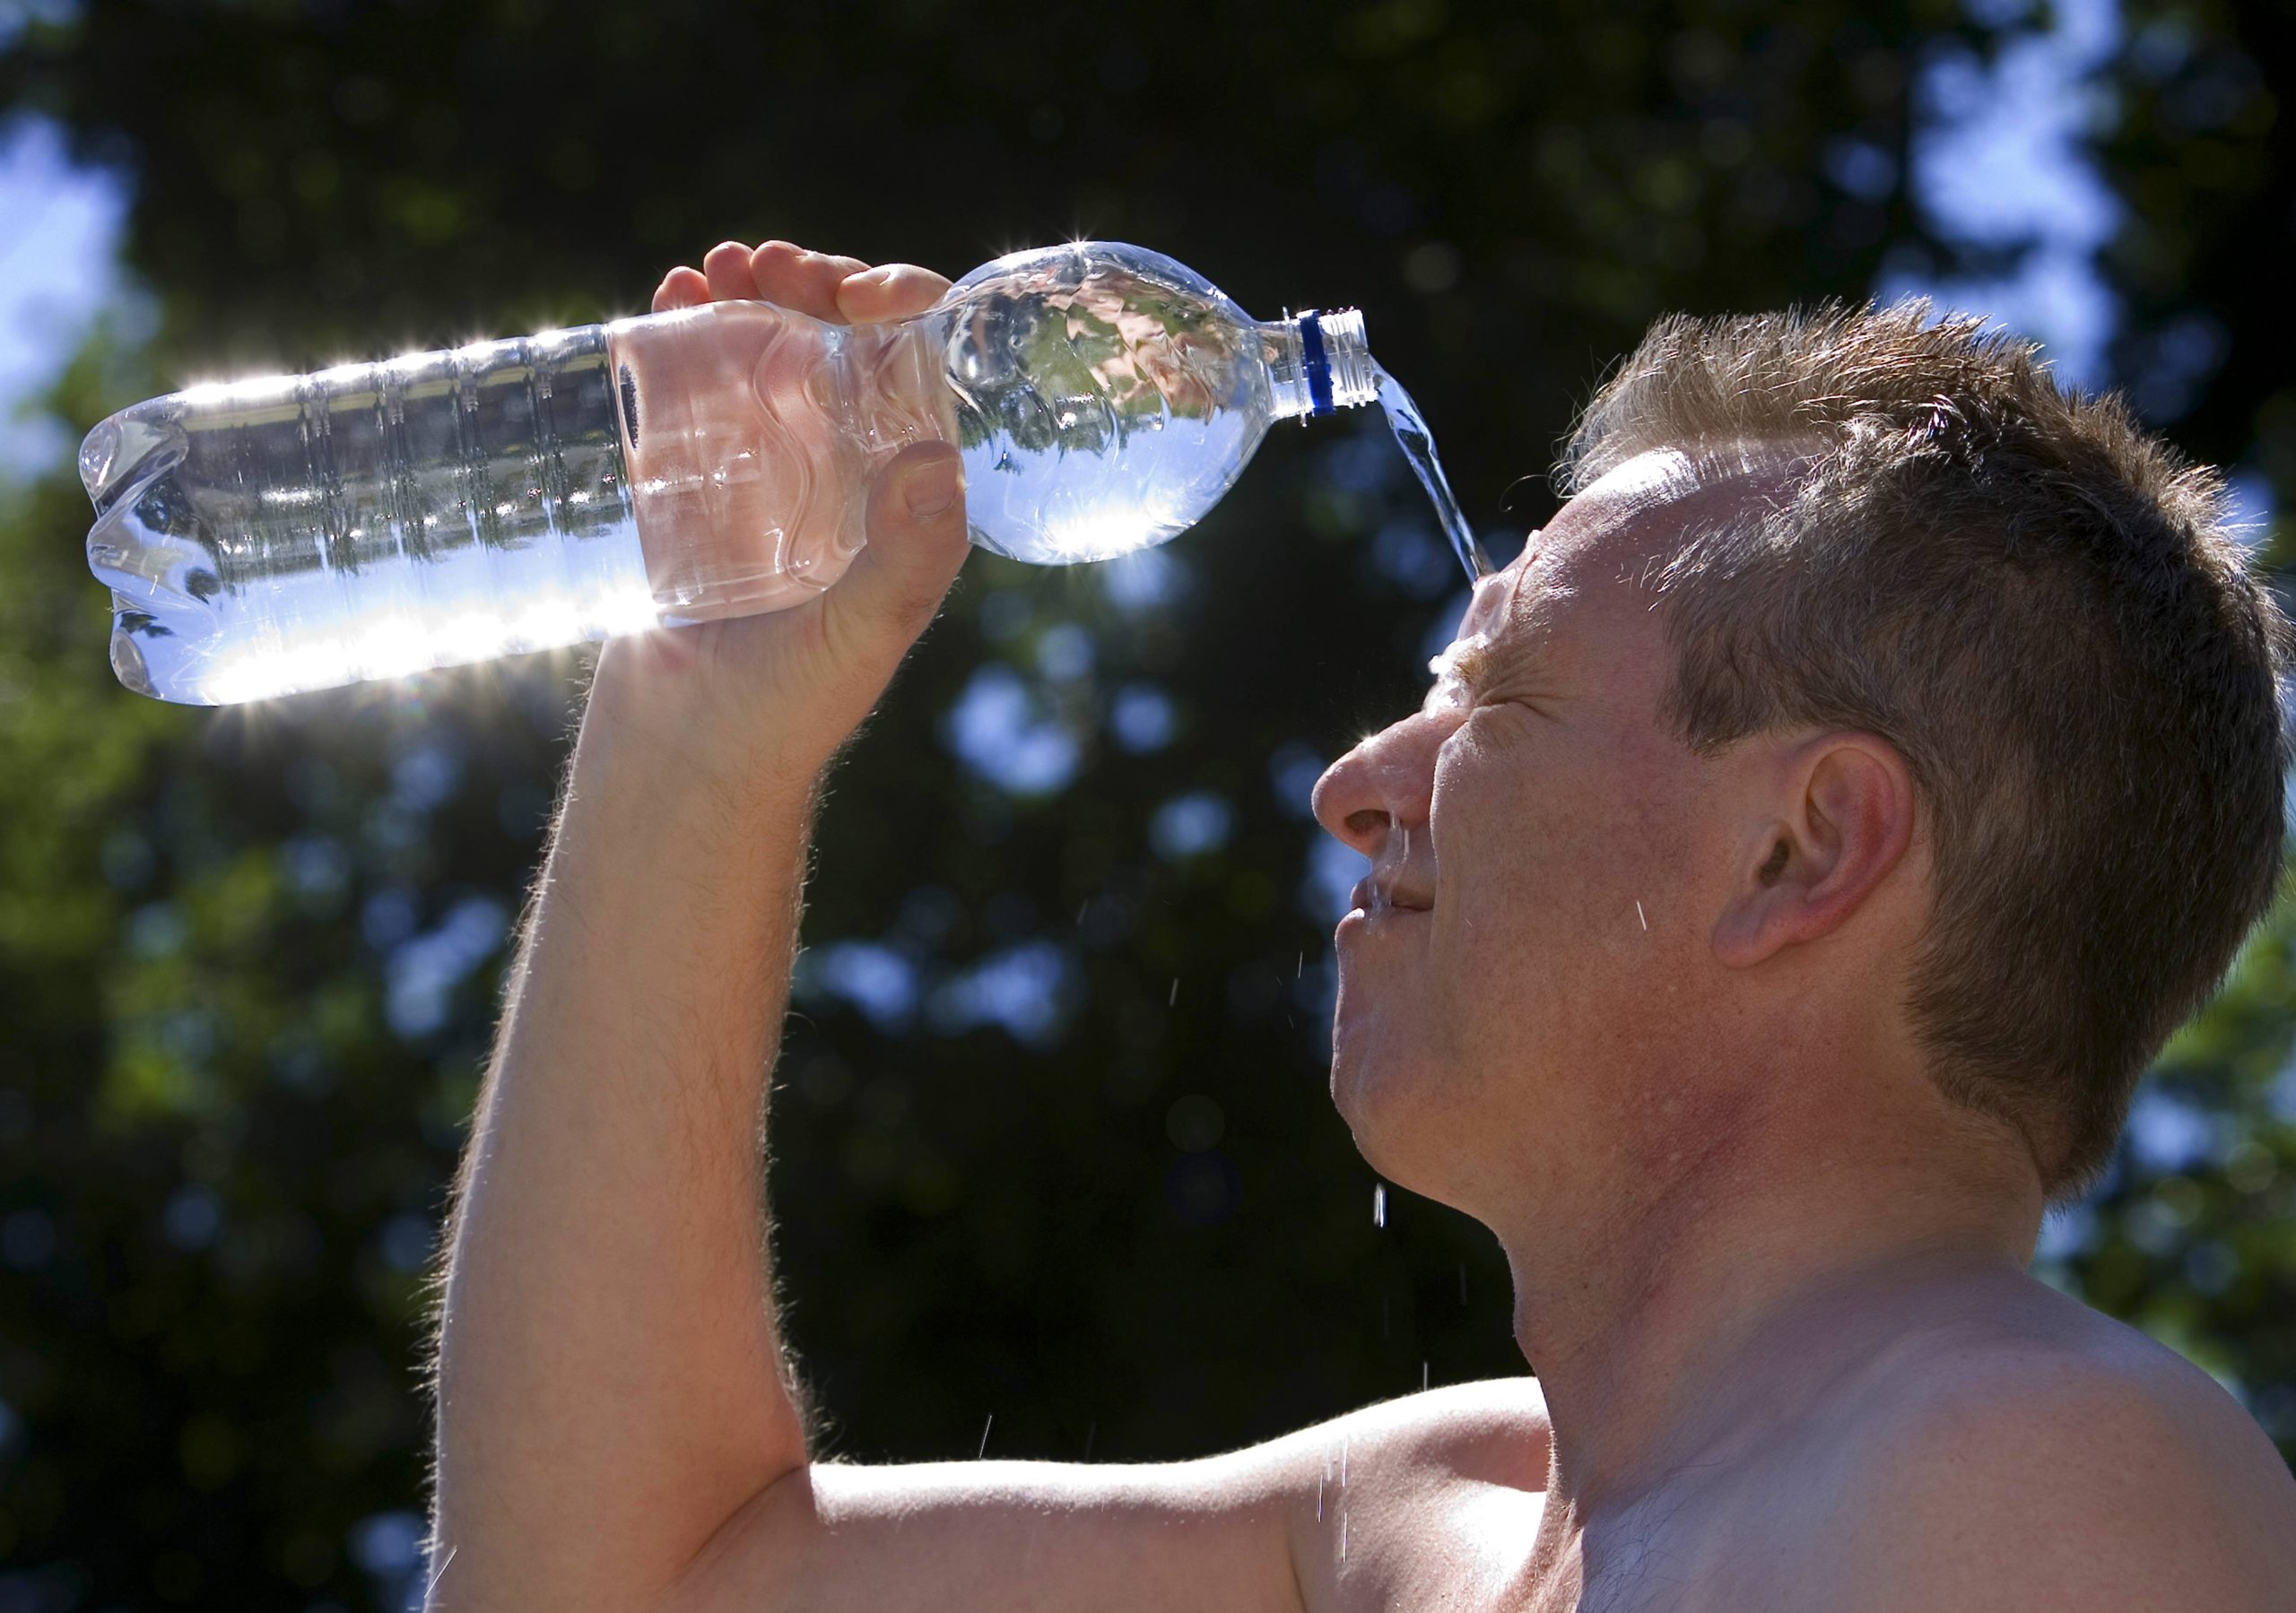 Heatwave: 10 essential tips from Spain’s Ministry of Health